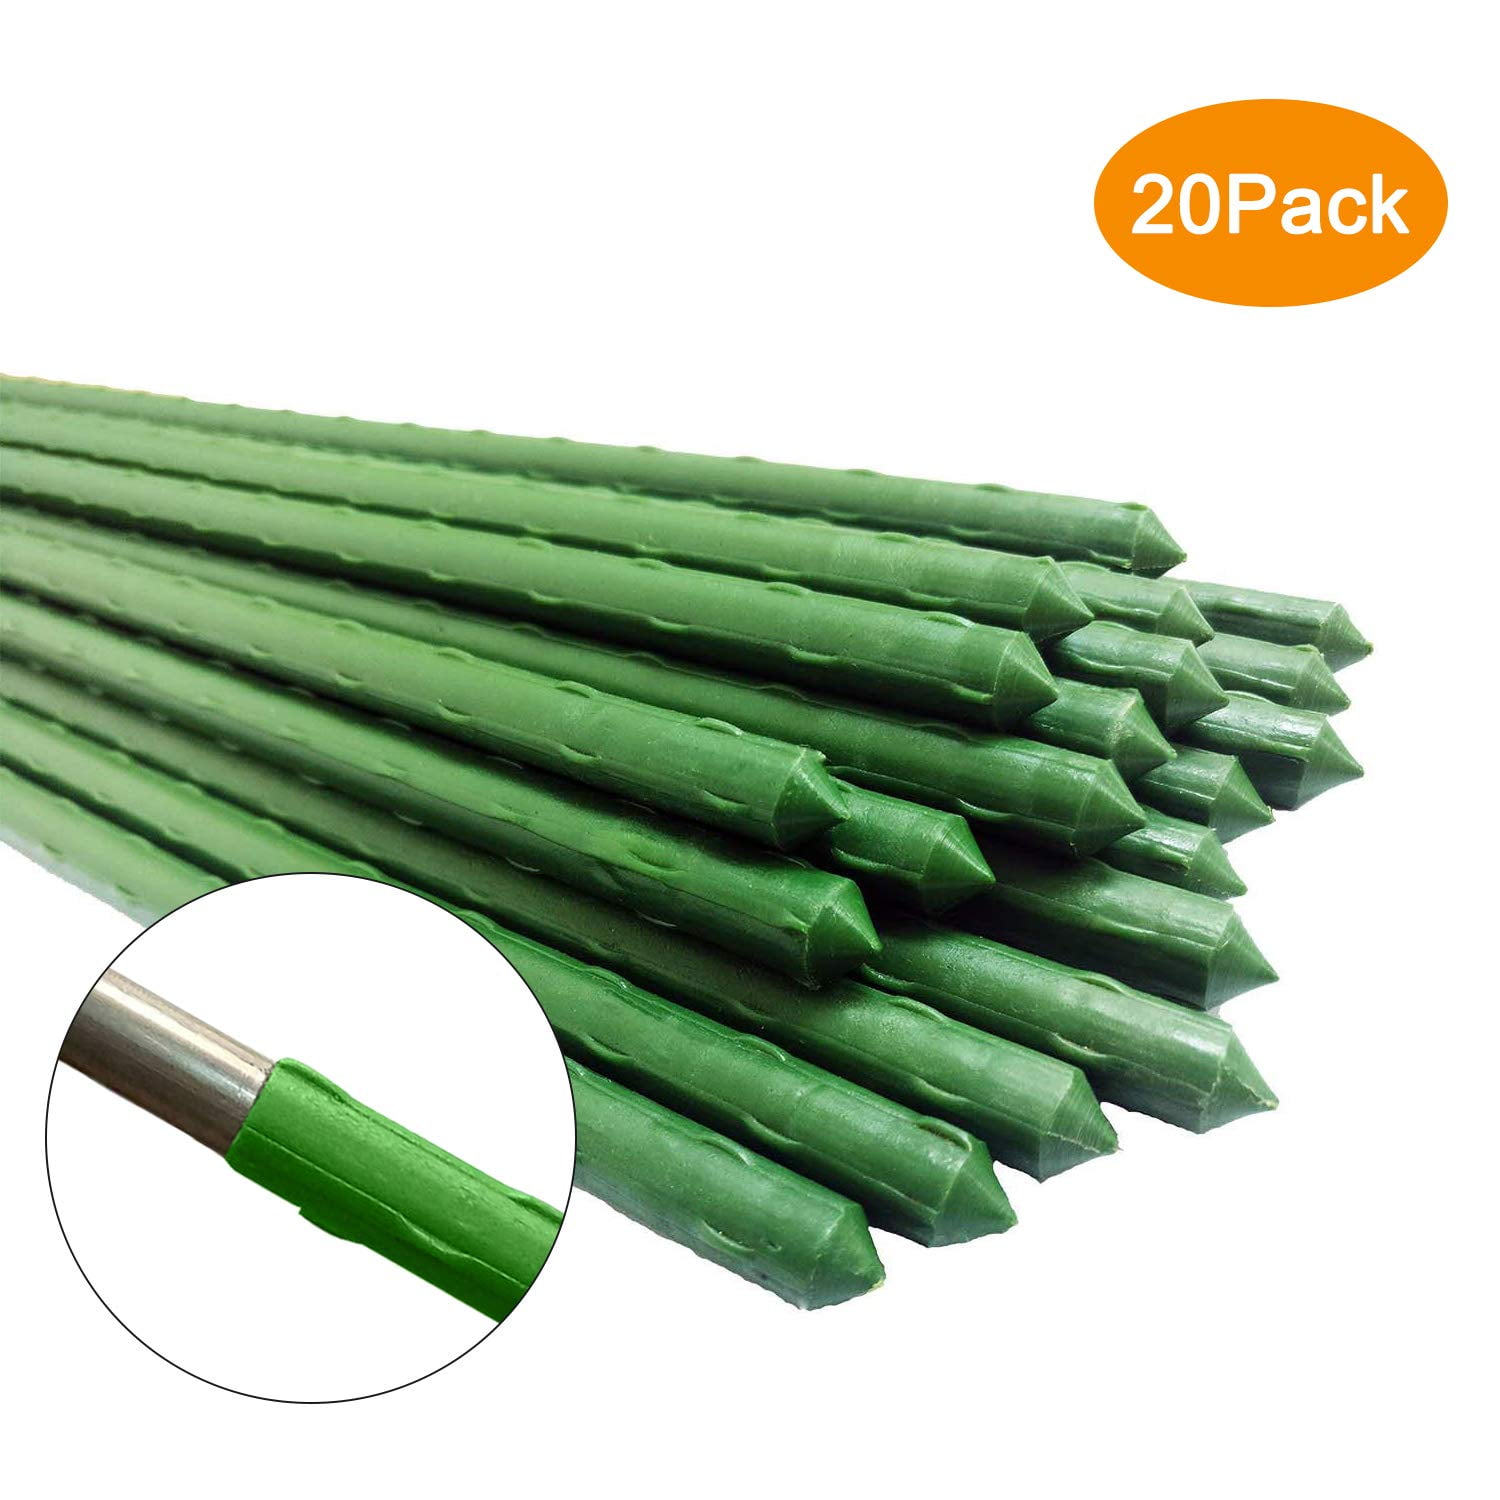 F.O.T Sturdy Metal Garden Stakes 24Pcs Gardening Support 1.97 Ft Plastic Coated Plant Sticks 4ft 0.63in-Dia 20PCS+30Accessories 